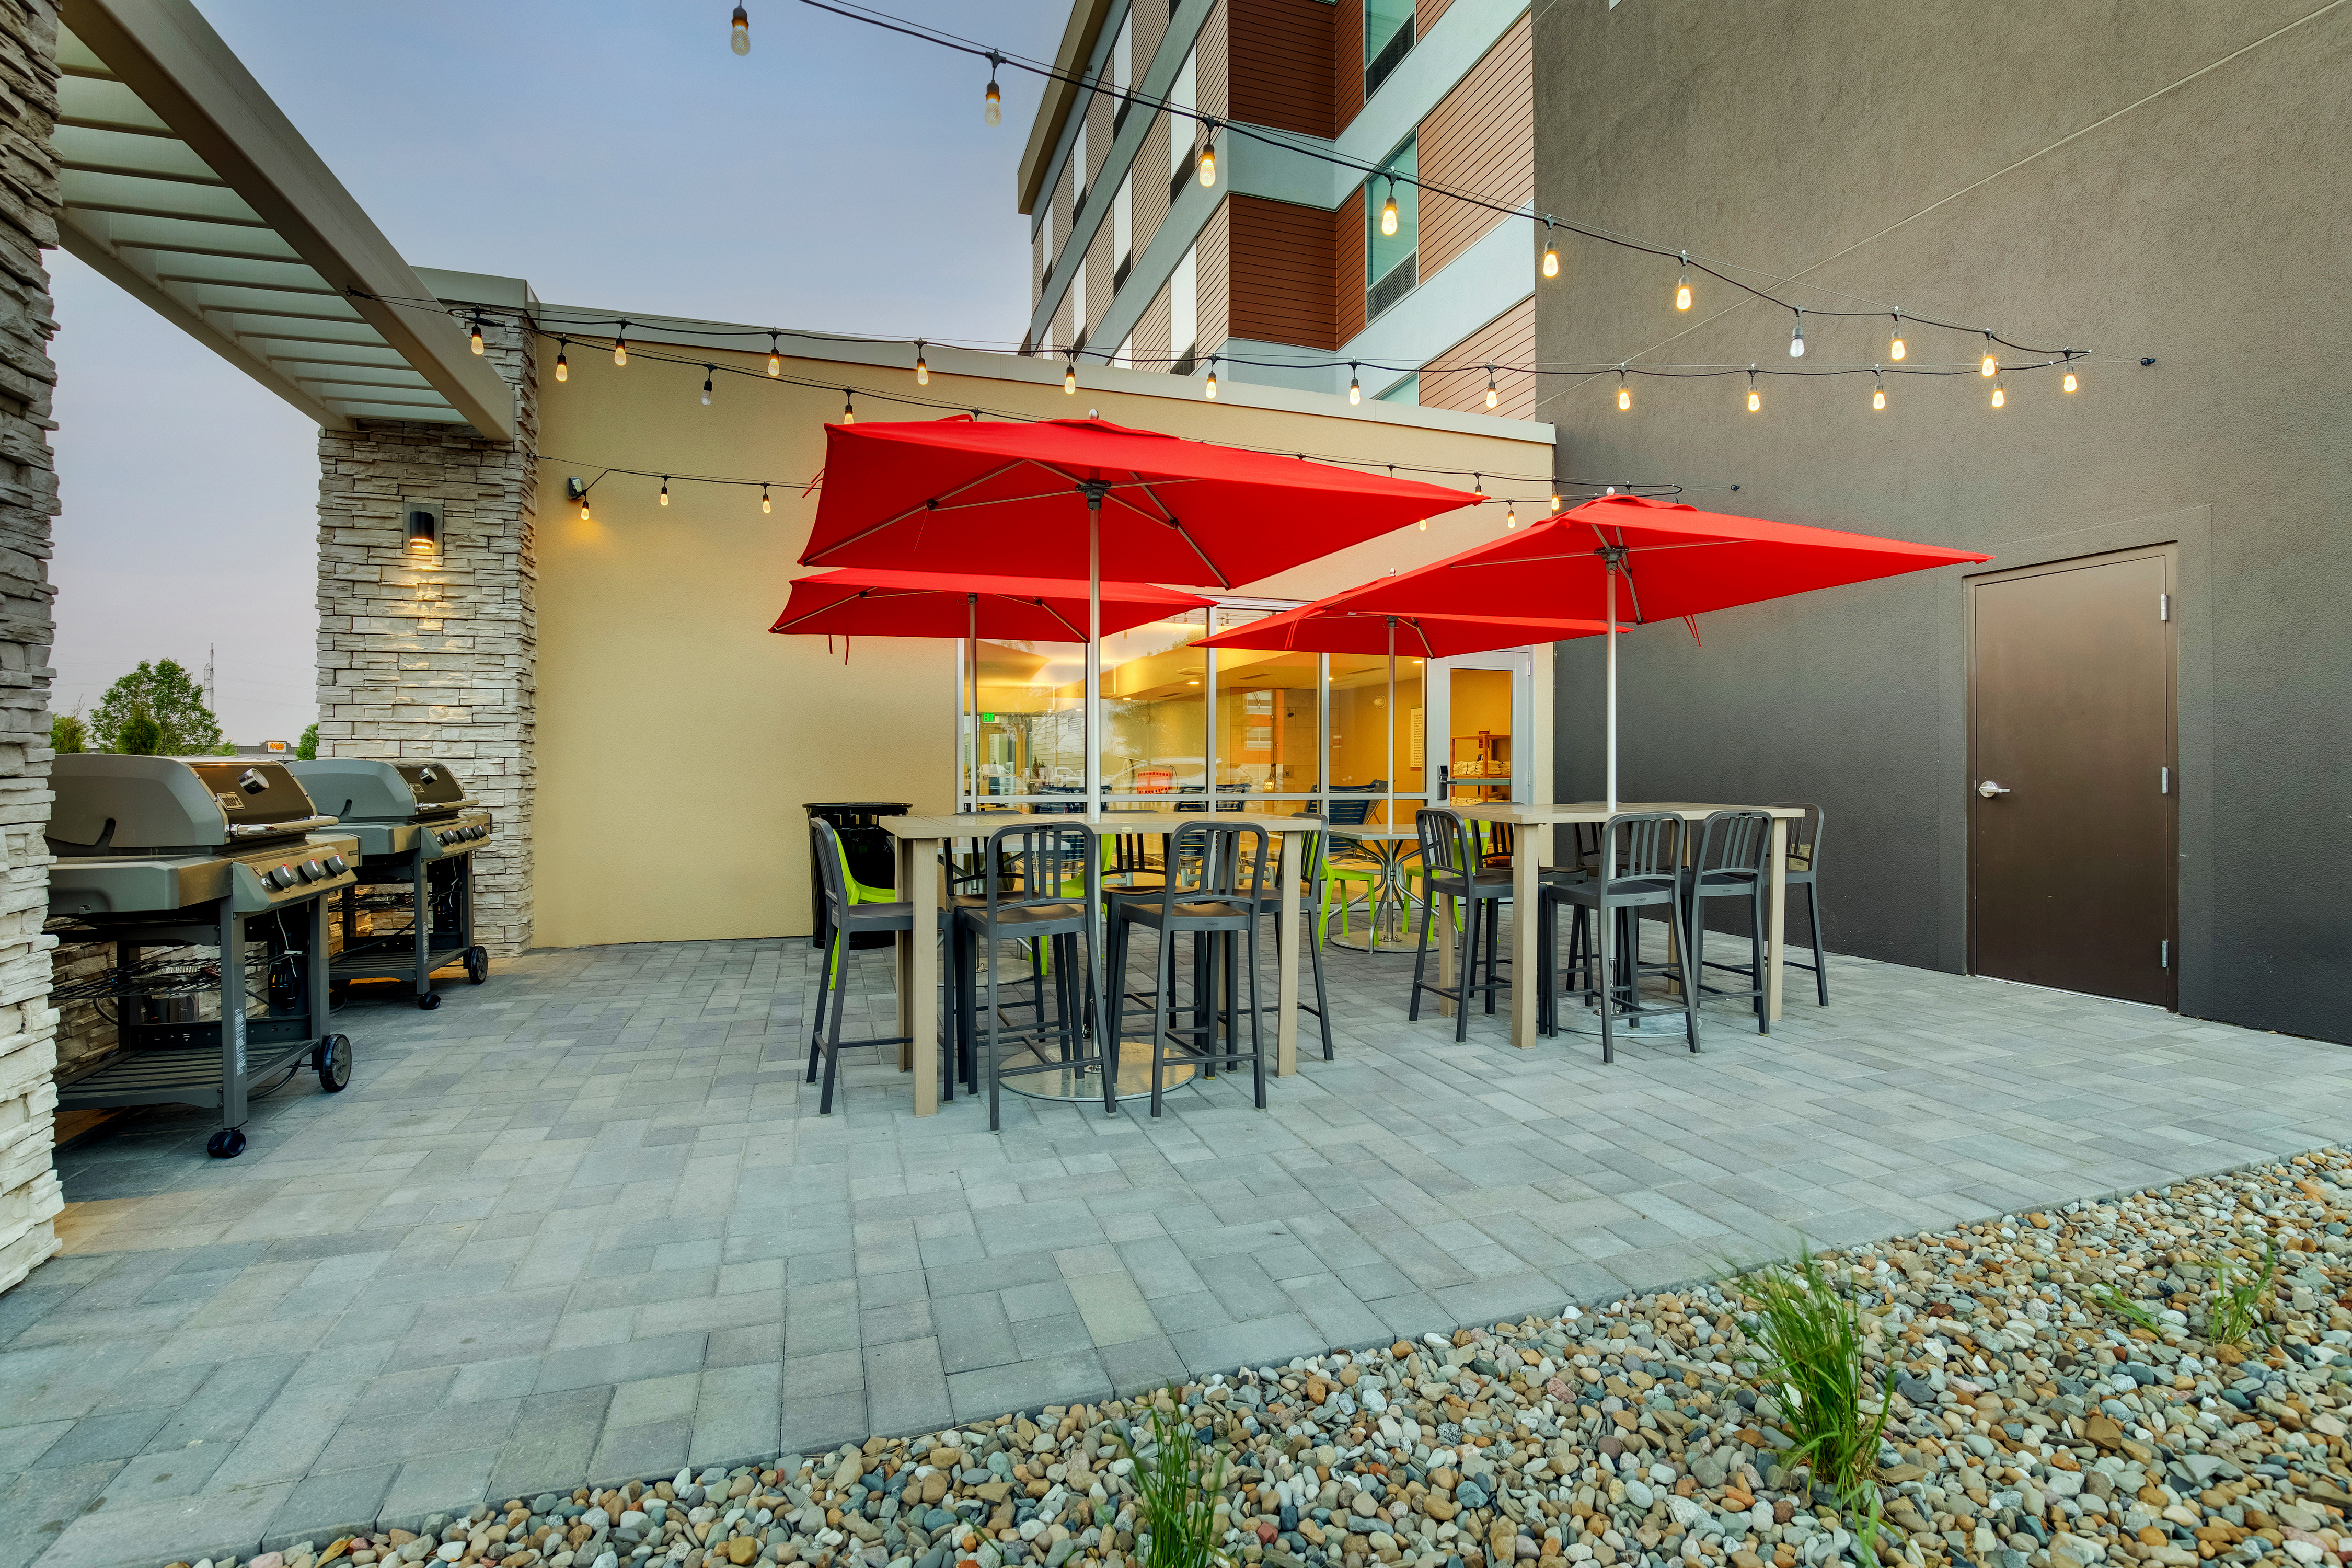 outdoor patio, bbq grills, tables, chairs, red umbrellas